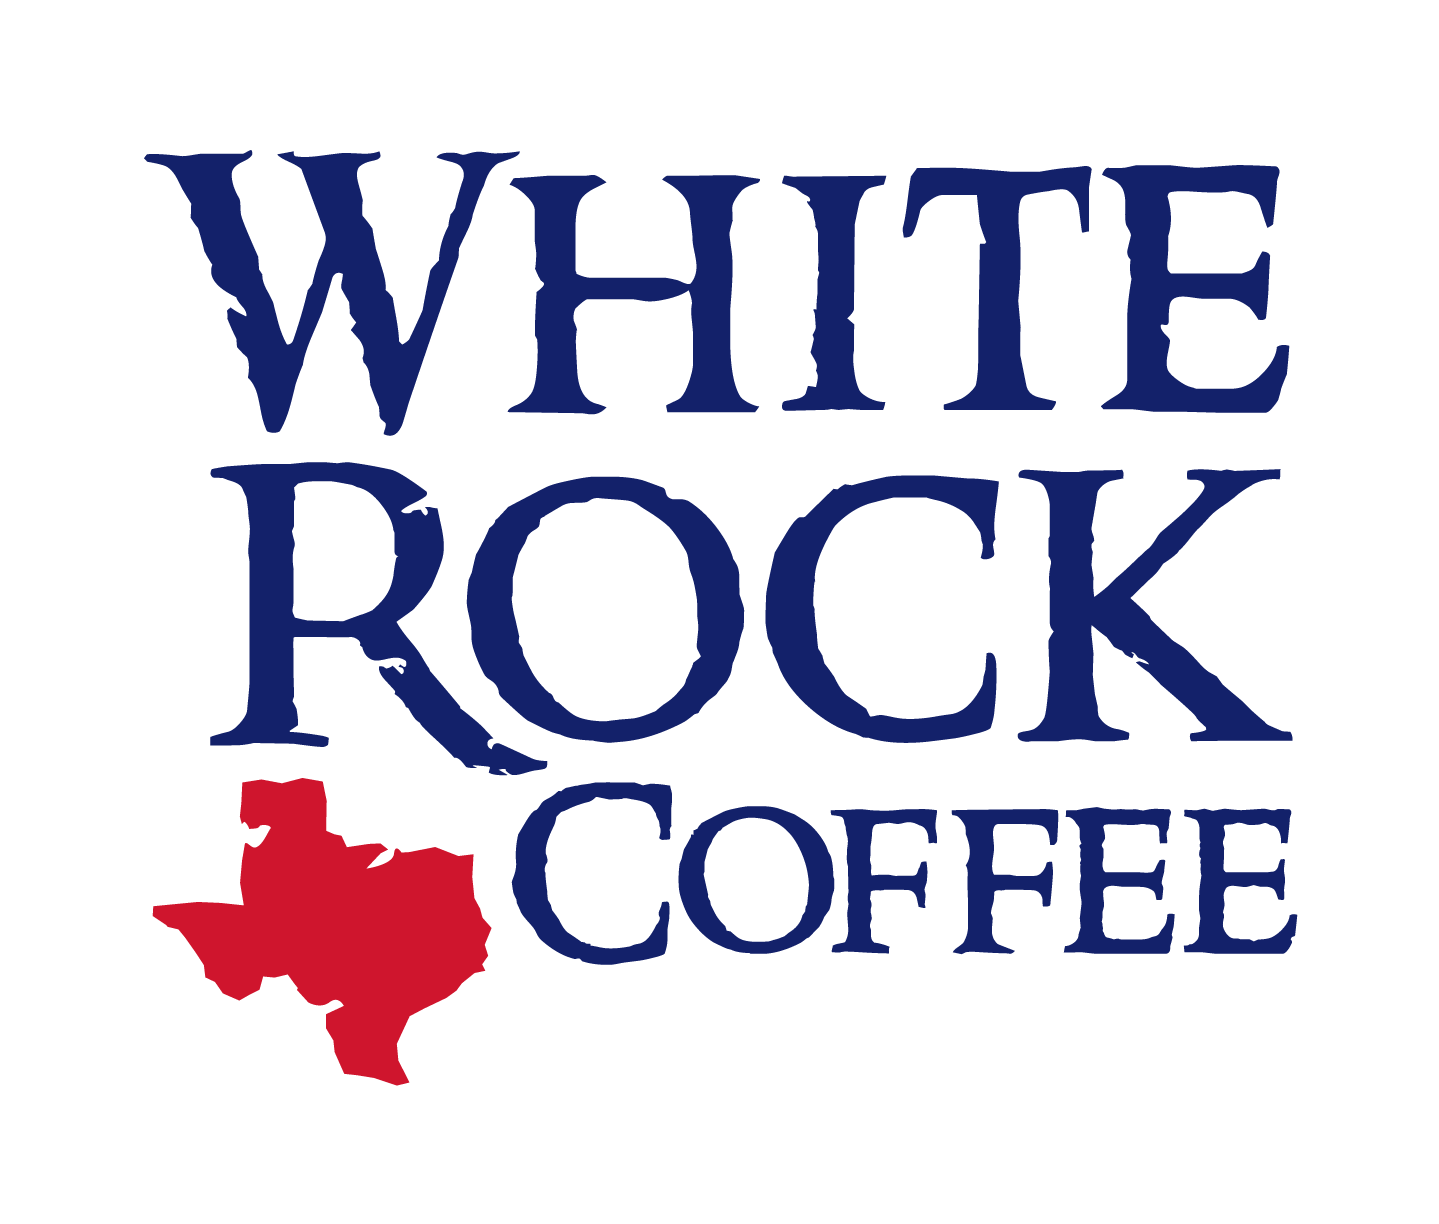 UBER Convention Event - White Rock Coffee